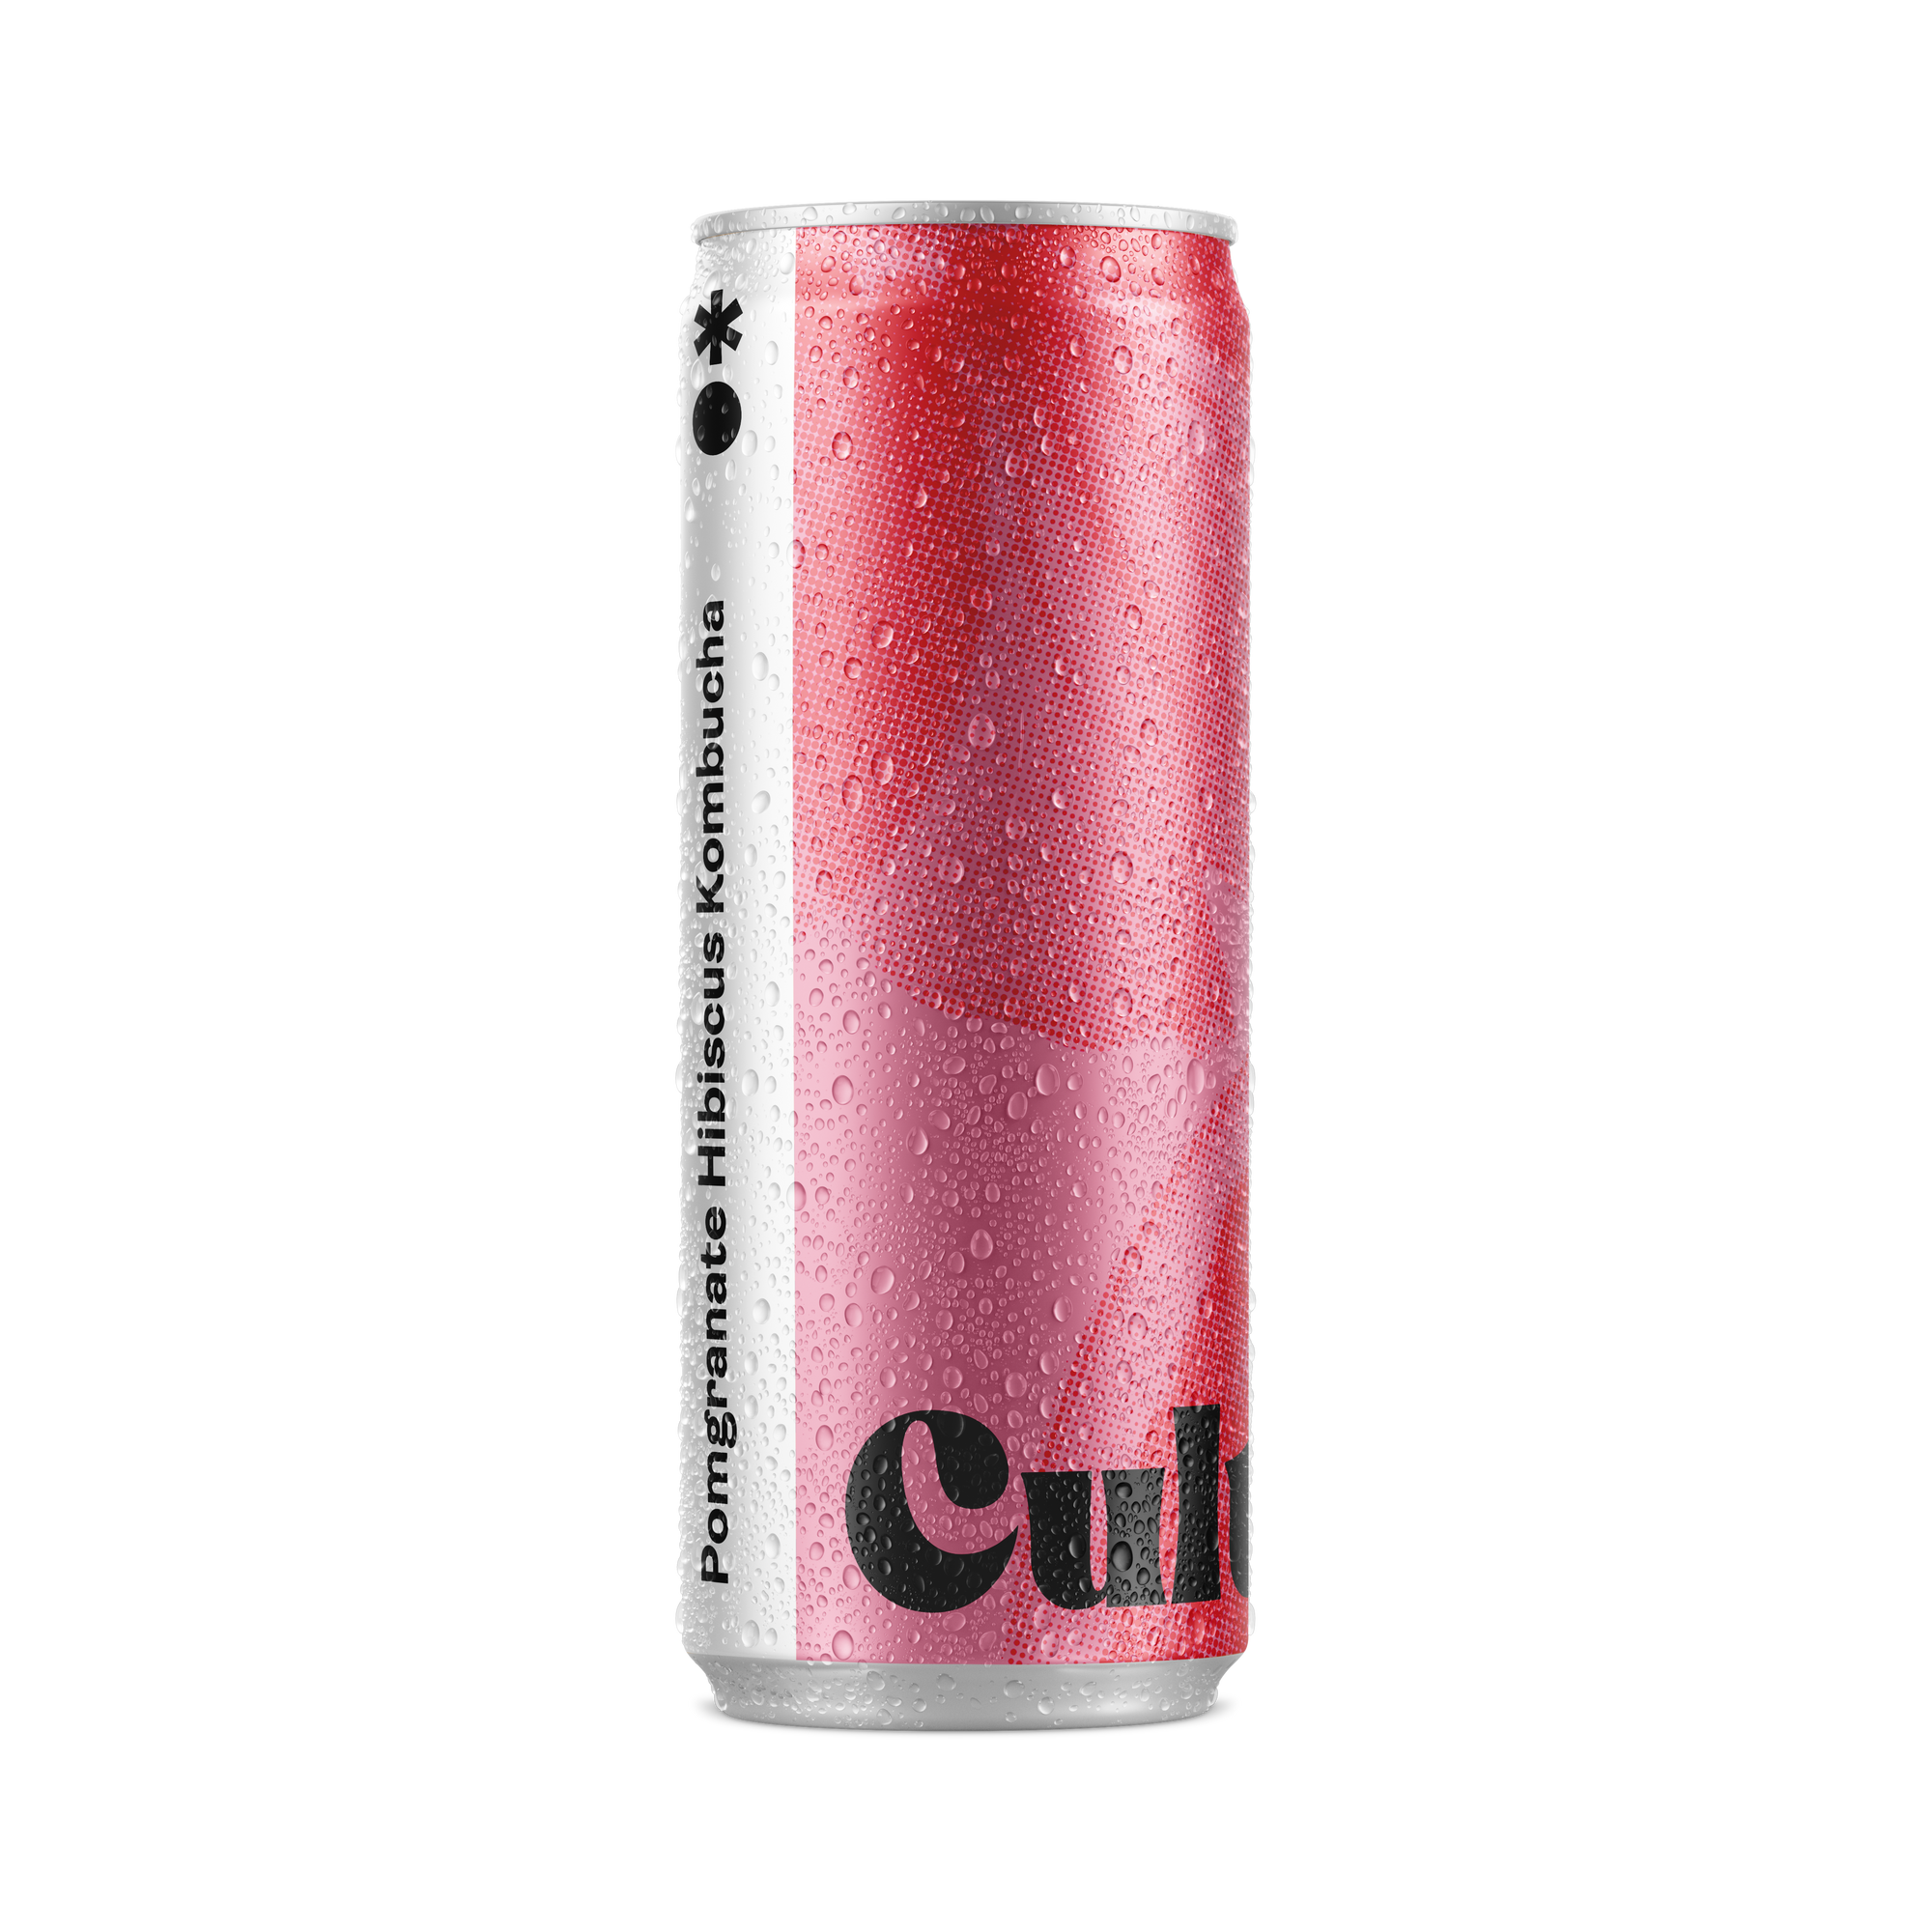 Pomegranate Hibiscus (6 Can Pack)